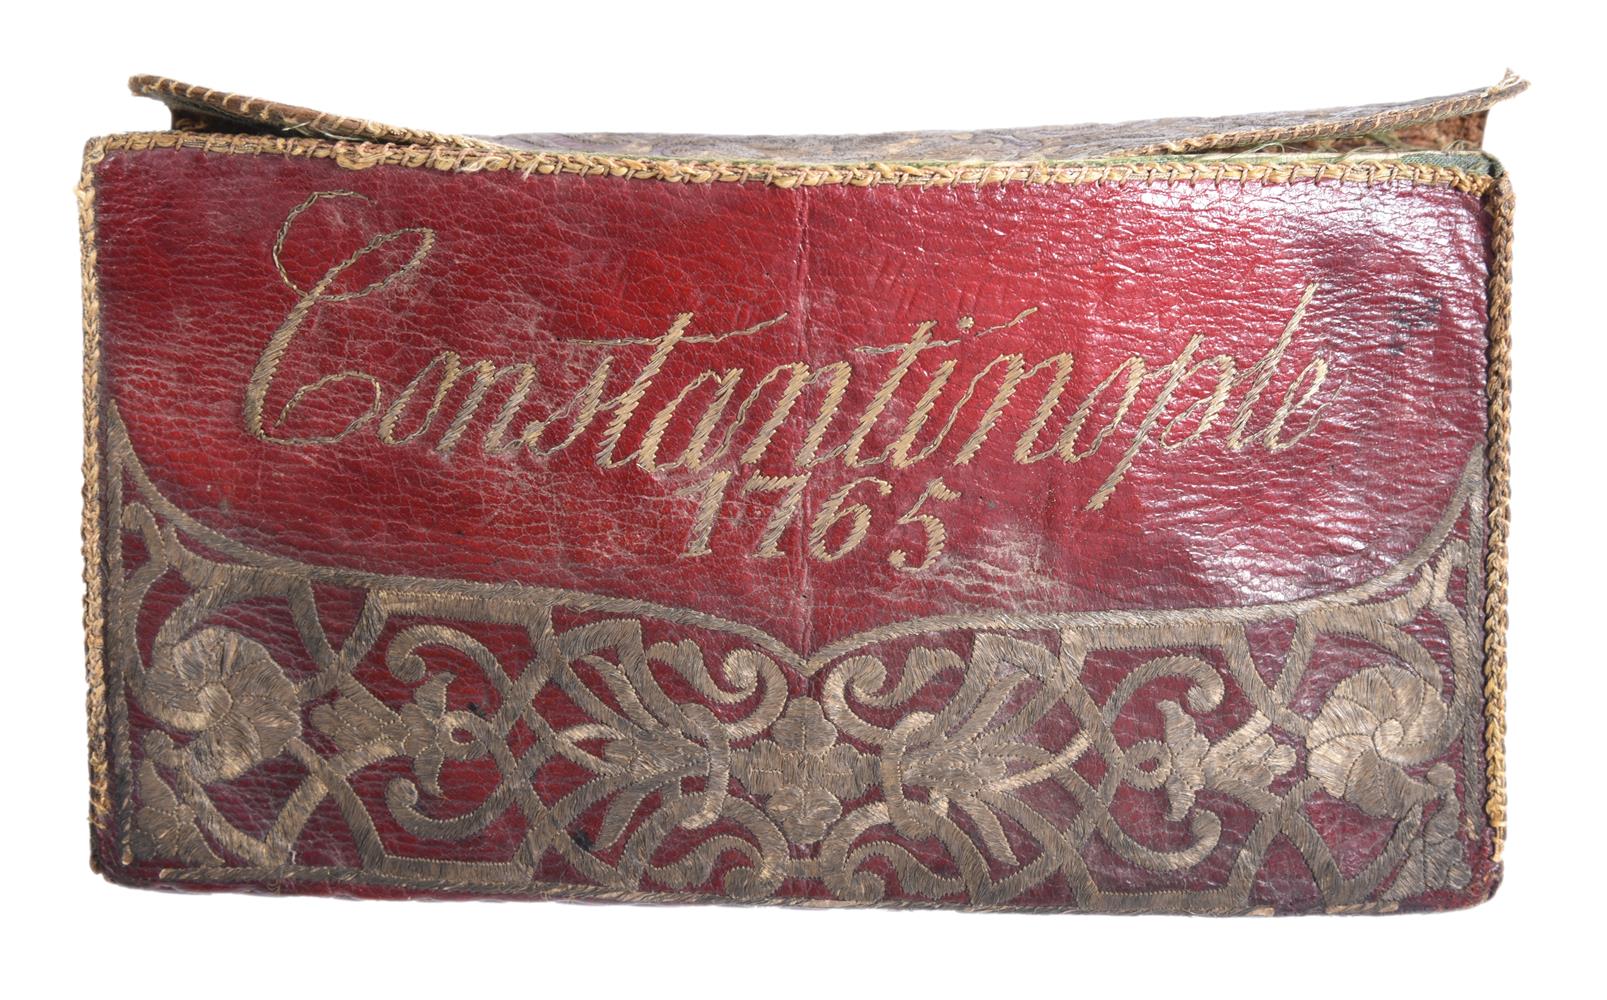 AN OTTOMAN METAL THREAD EMBROIDERED LEATHER PURSE, CONSTANTINOPLE, 1765 - Image 2 of 4